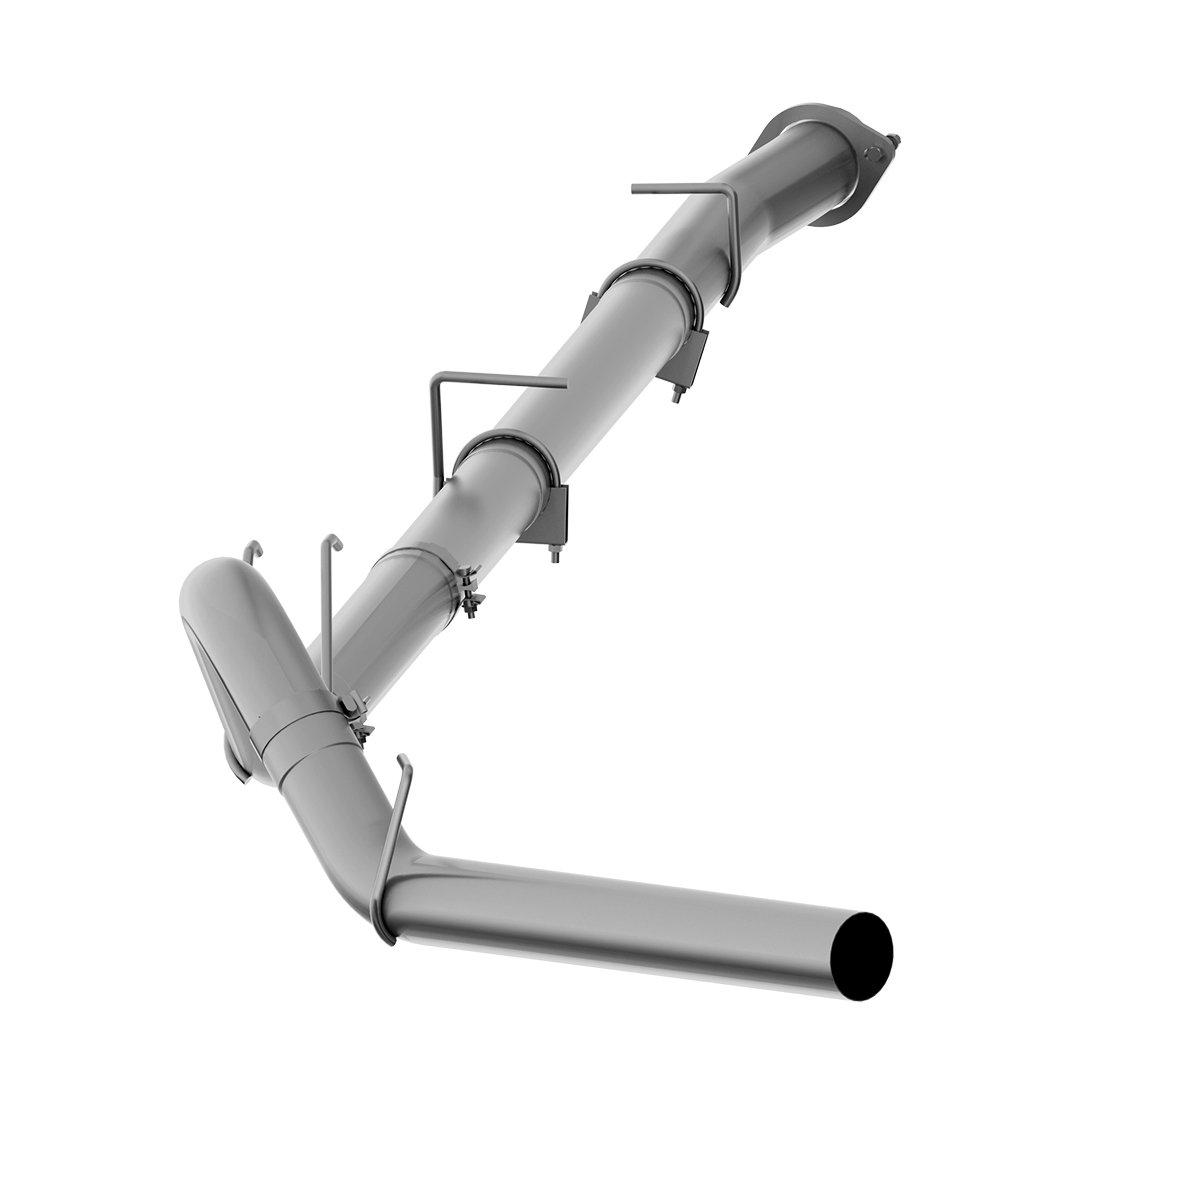 2008-2010 Powerstroke 4" Downpipe Back Exhaust System - No Muffler (C6254PLM)-Downpipe Back Exhaust System-P1 Performance Products-C6254PLM-Dirty Diesel Customs